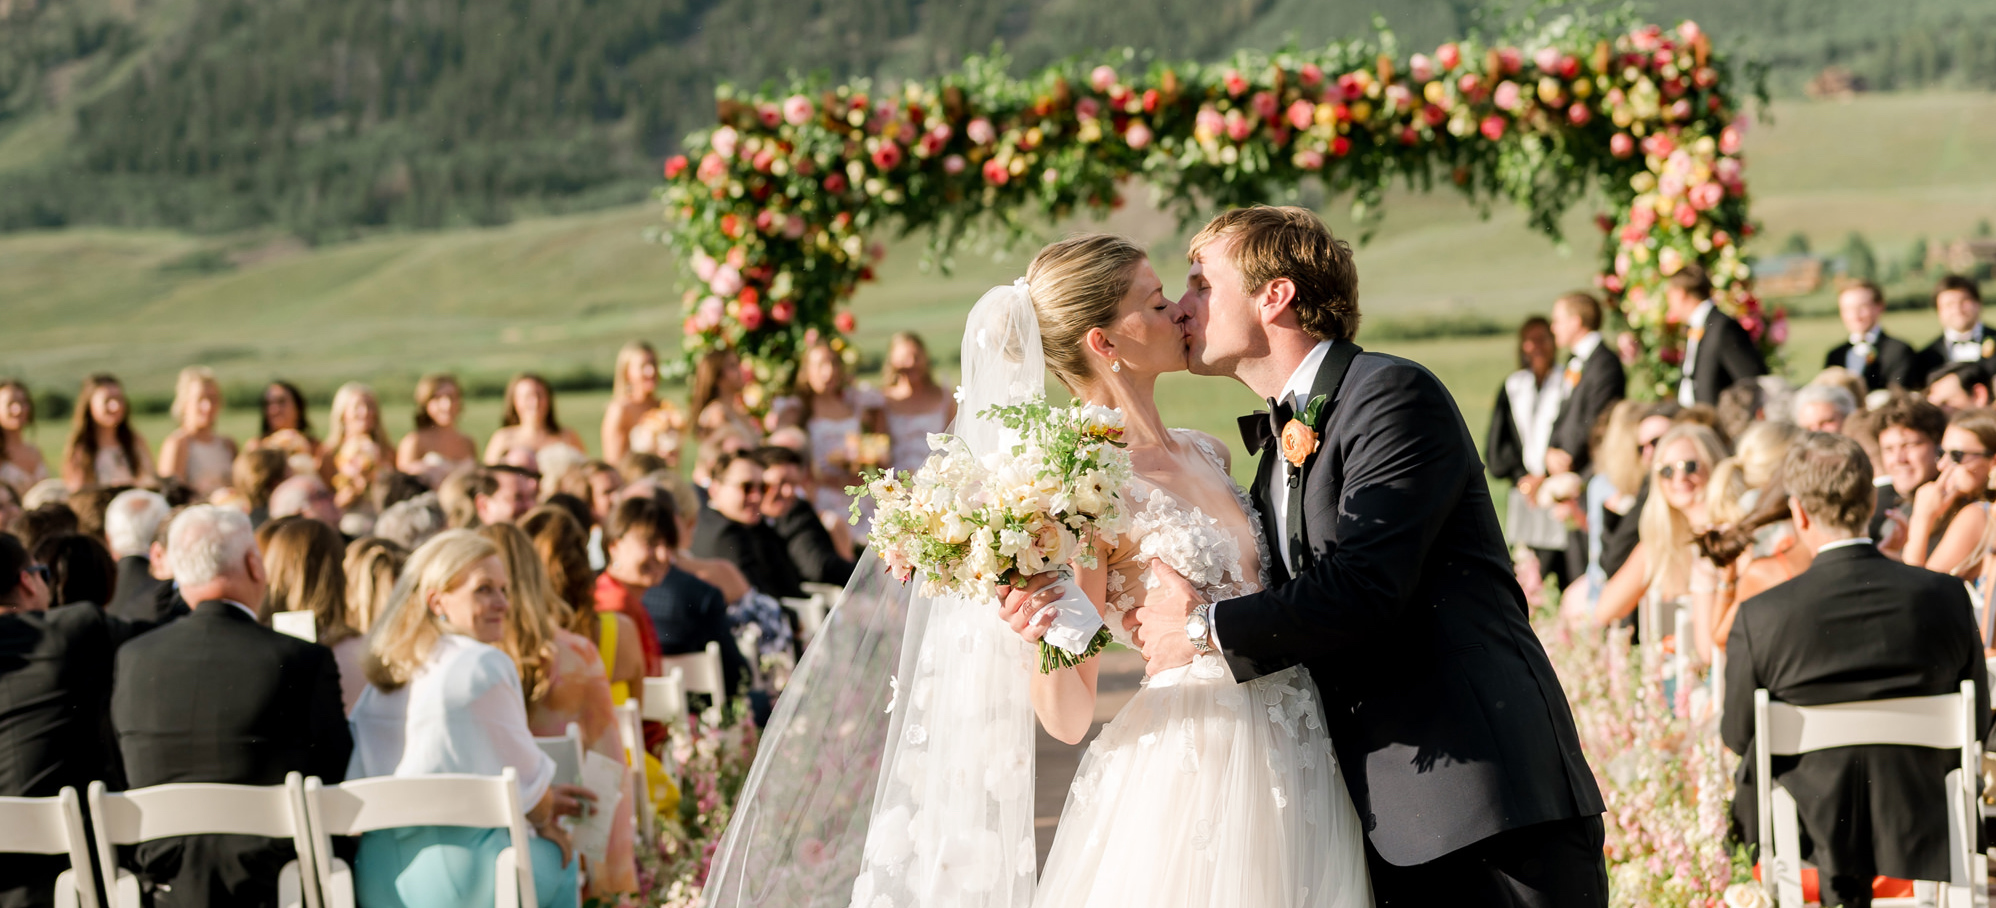 An Elevated Wedding in Crested Butte Was Followed by a Cowboy Disco After-Party